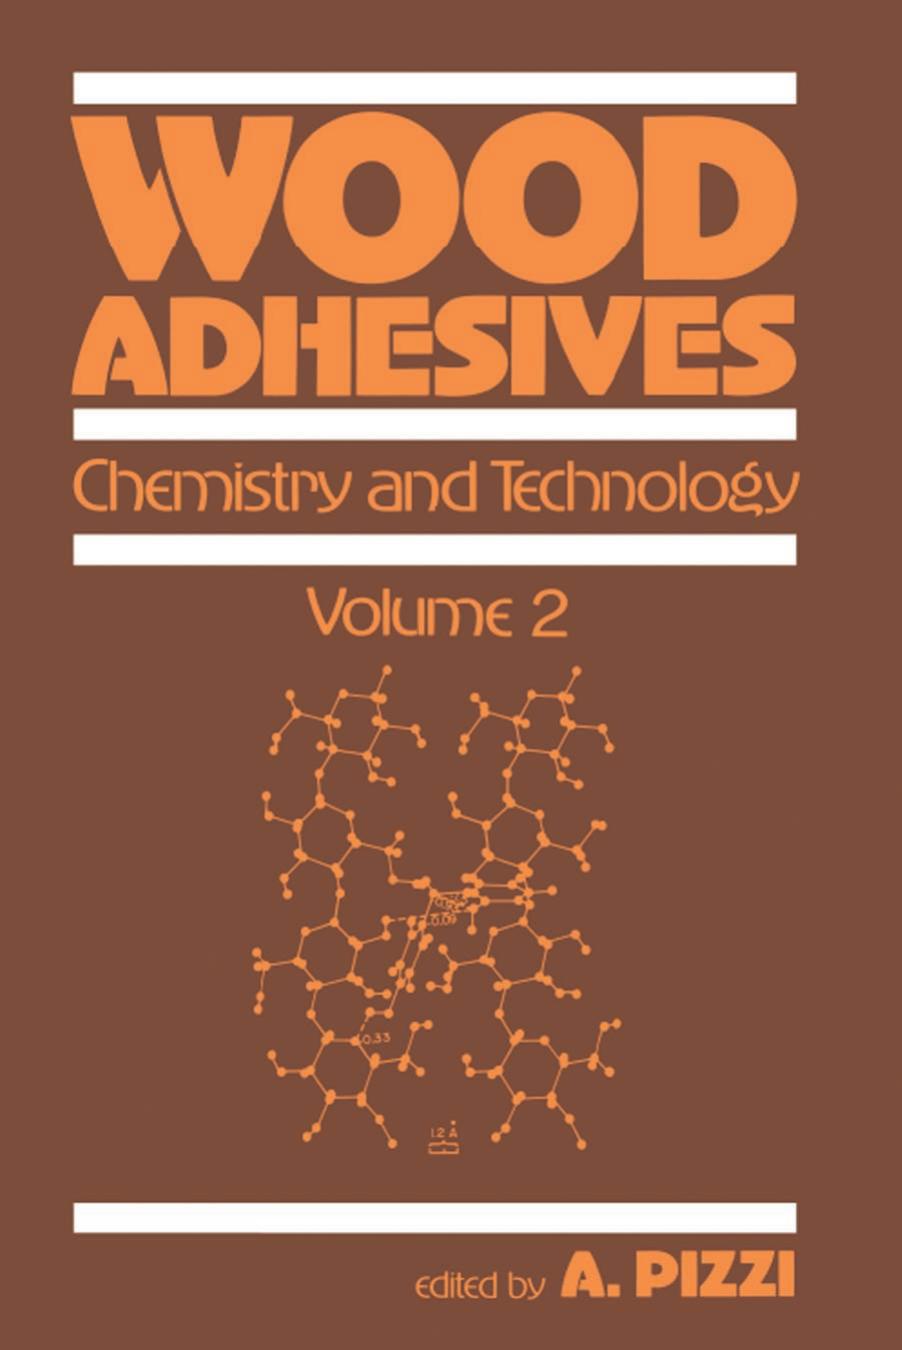 WOOD ADHESIVES: CHEMISTRY AND TECHNOLOGY